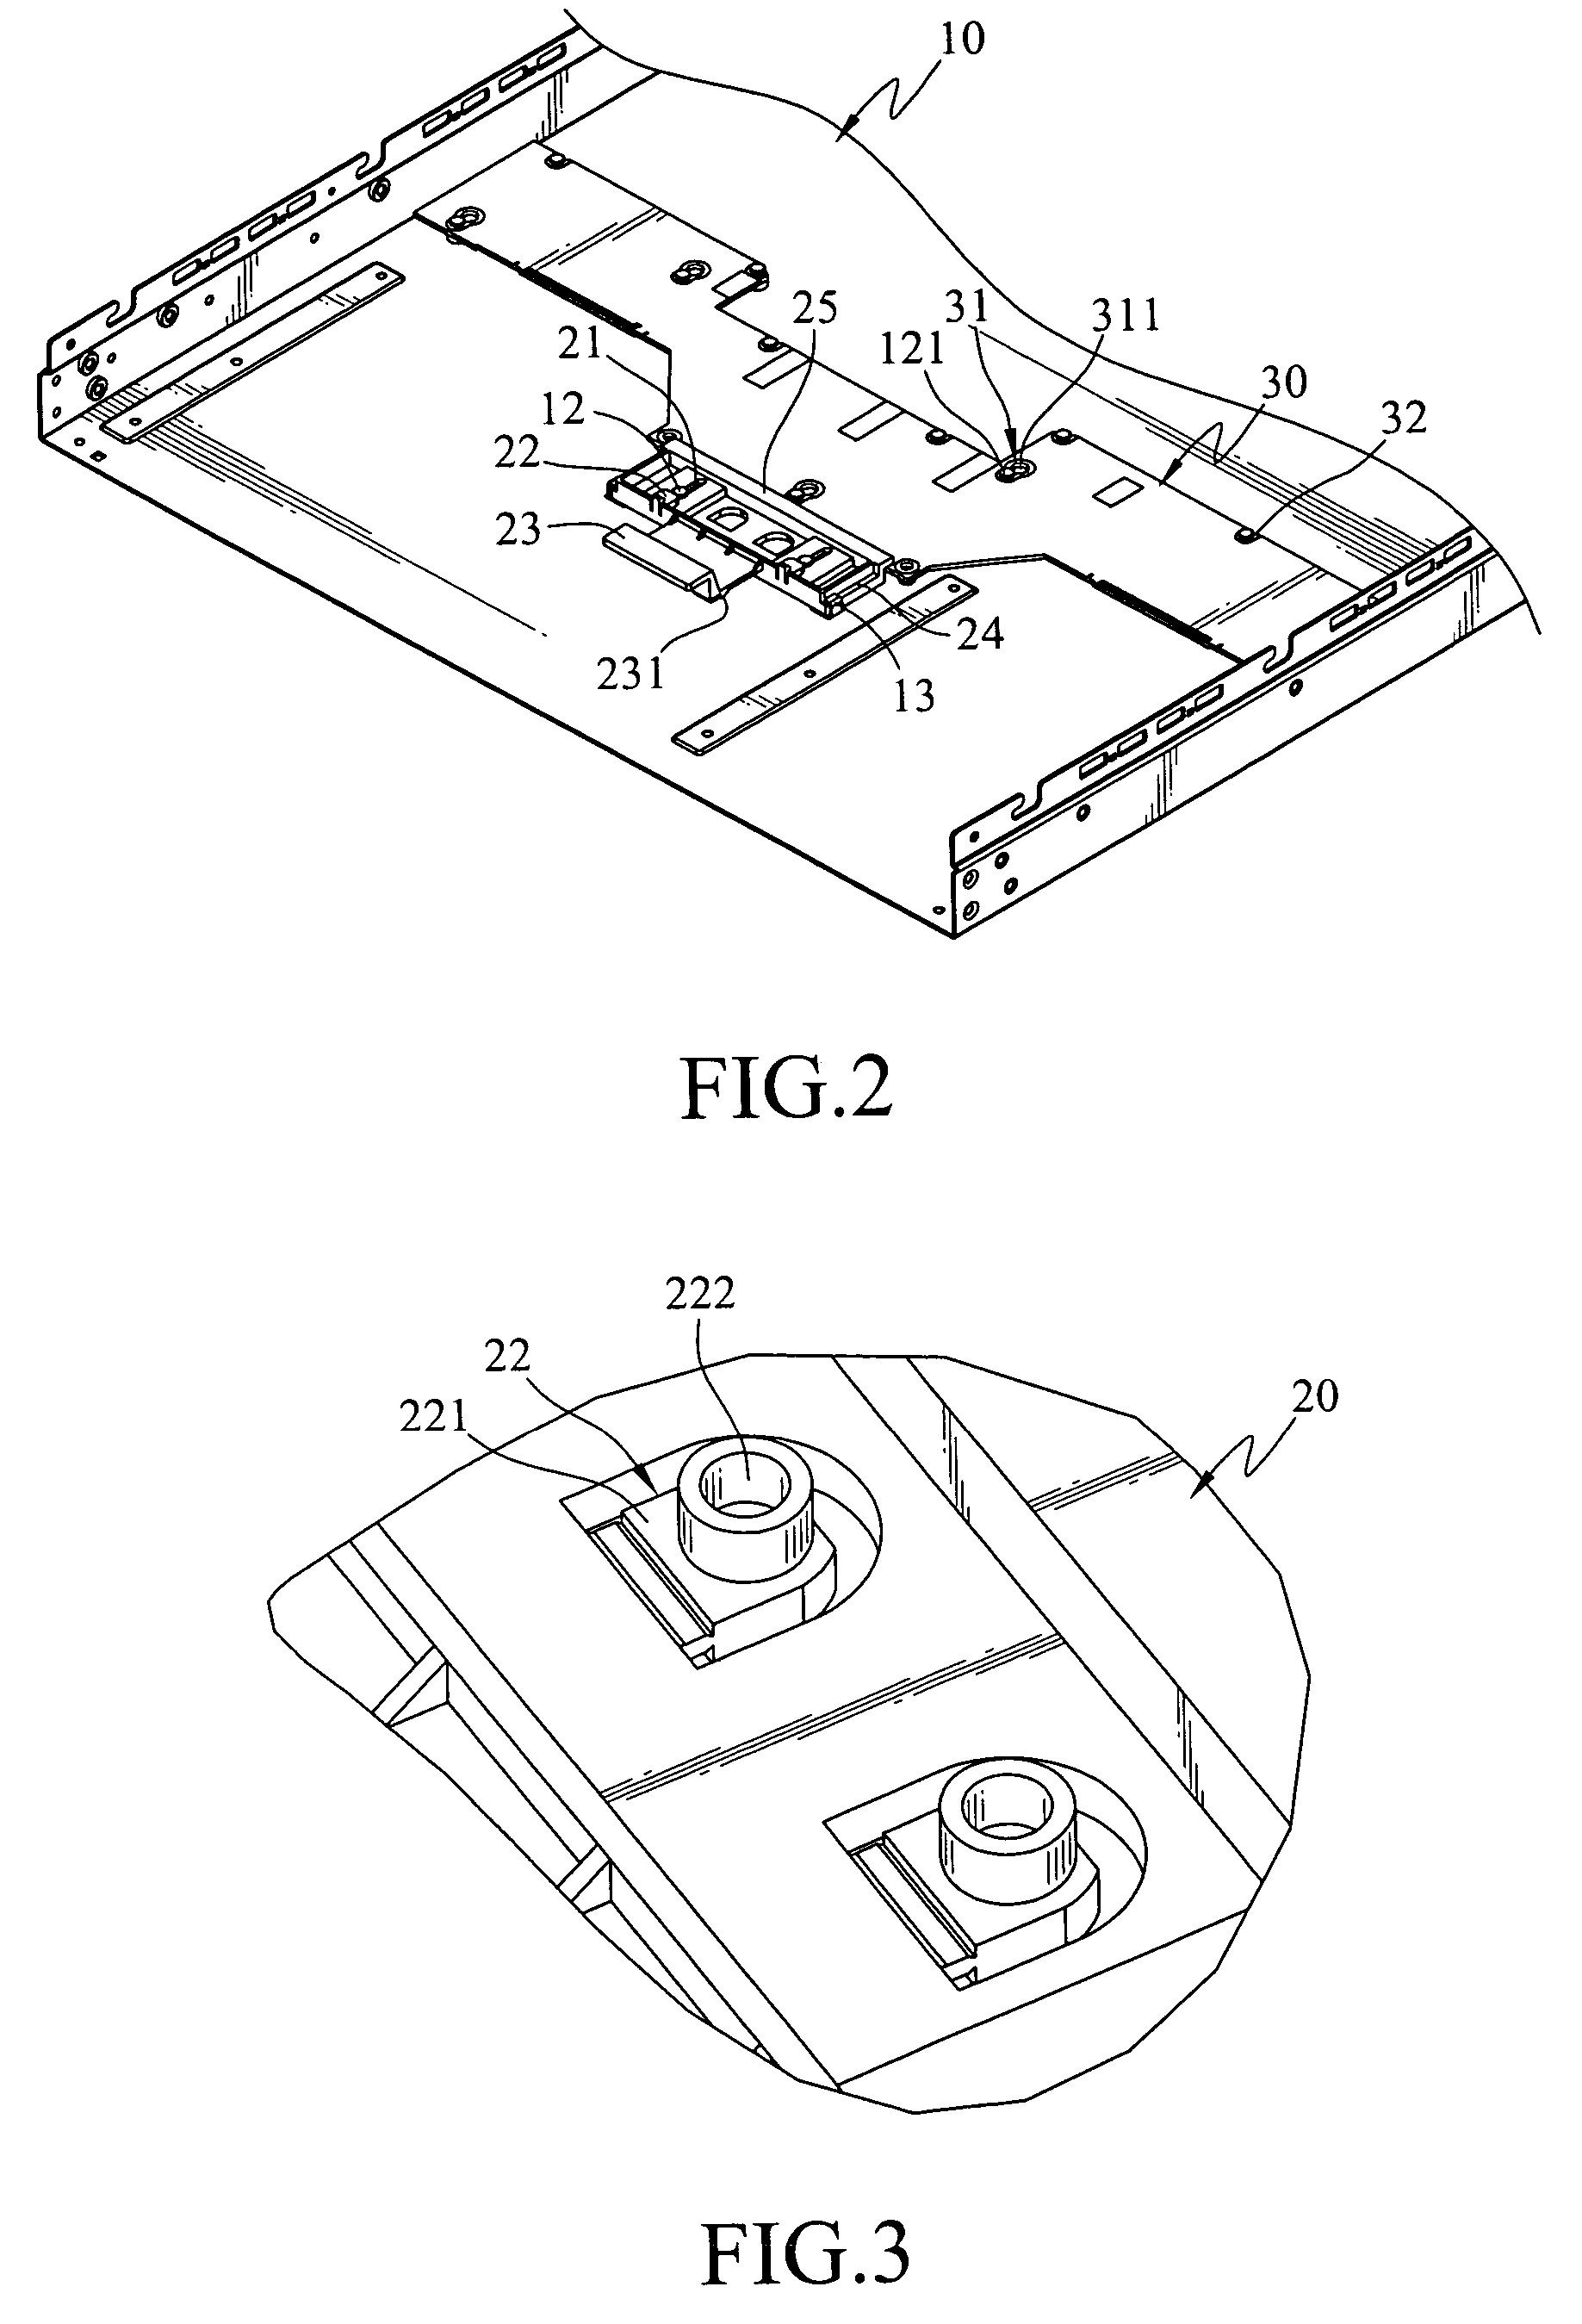 Circuit board fastening structure